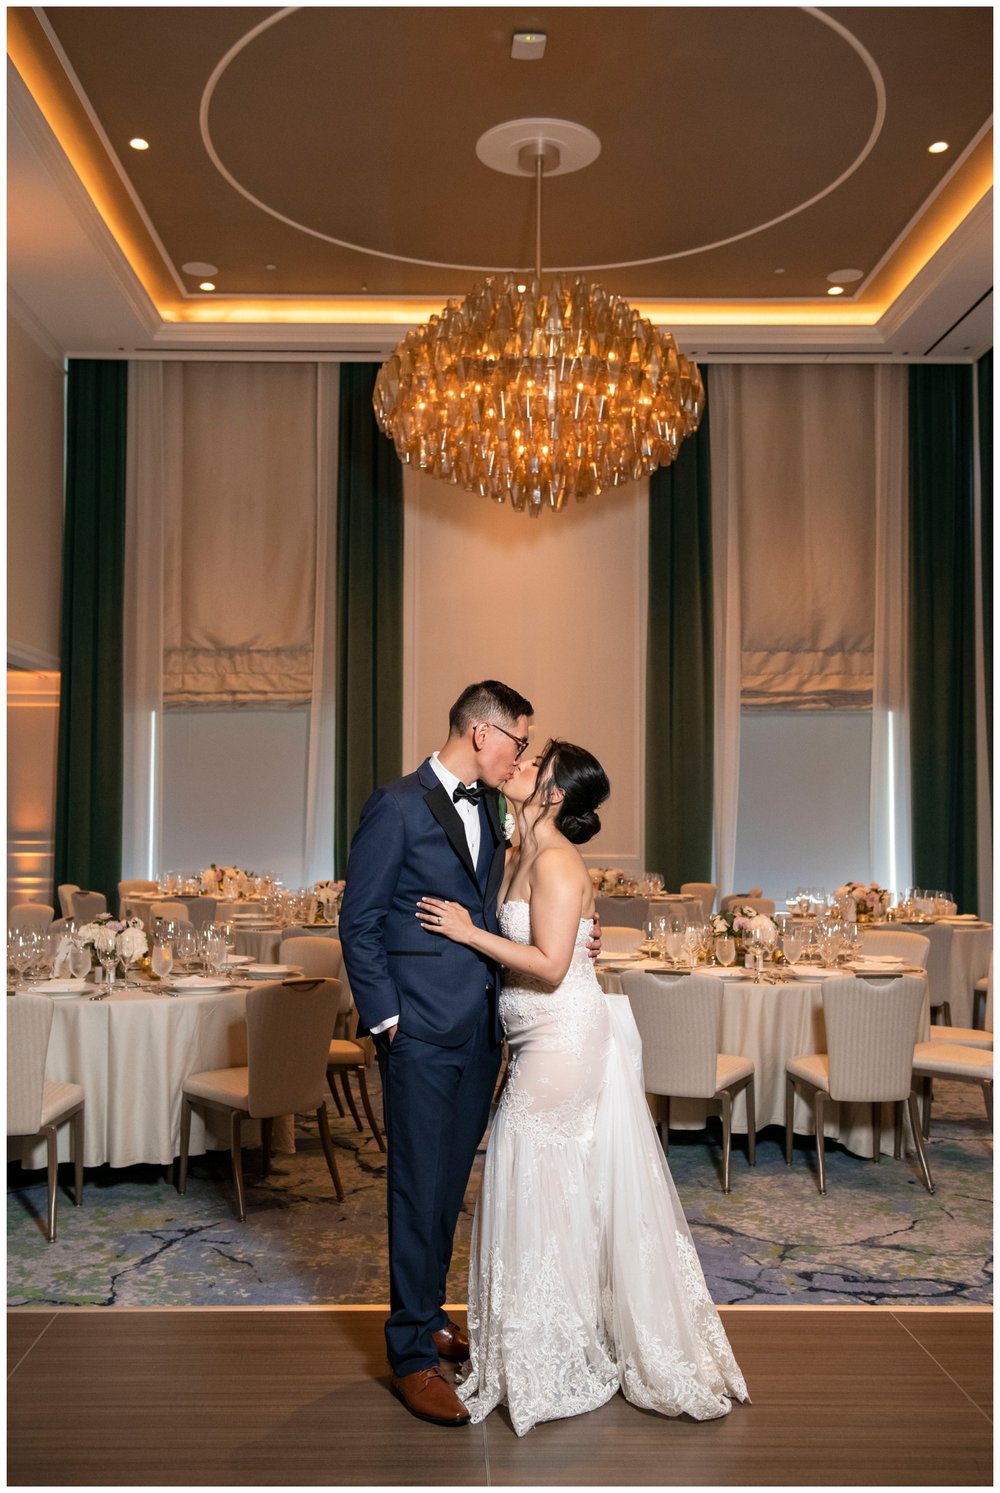 bride and groom portrait at reception space in The Newbury Hotel wedding reception hall